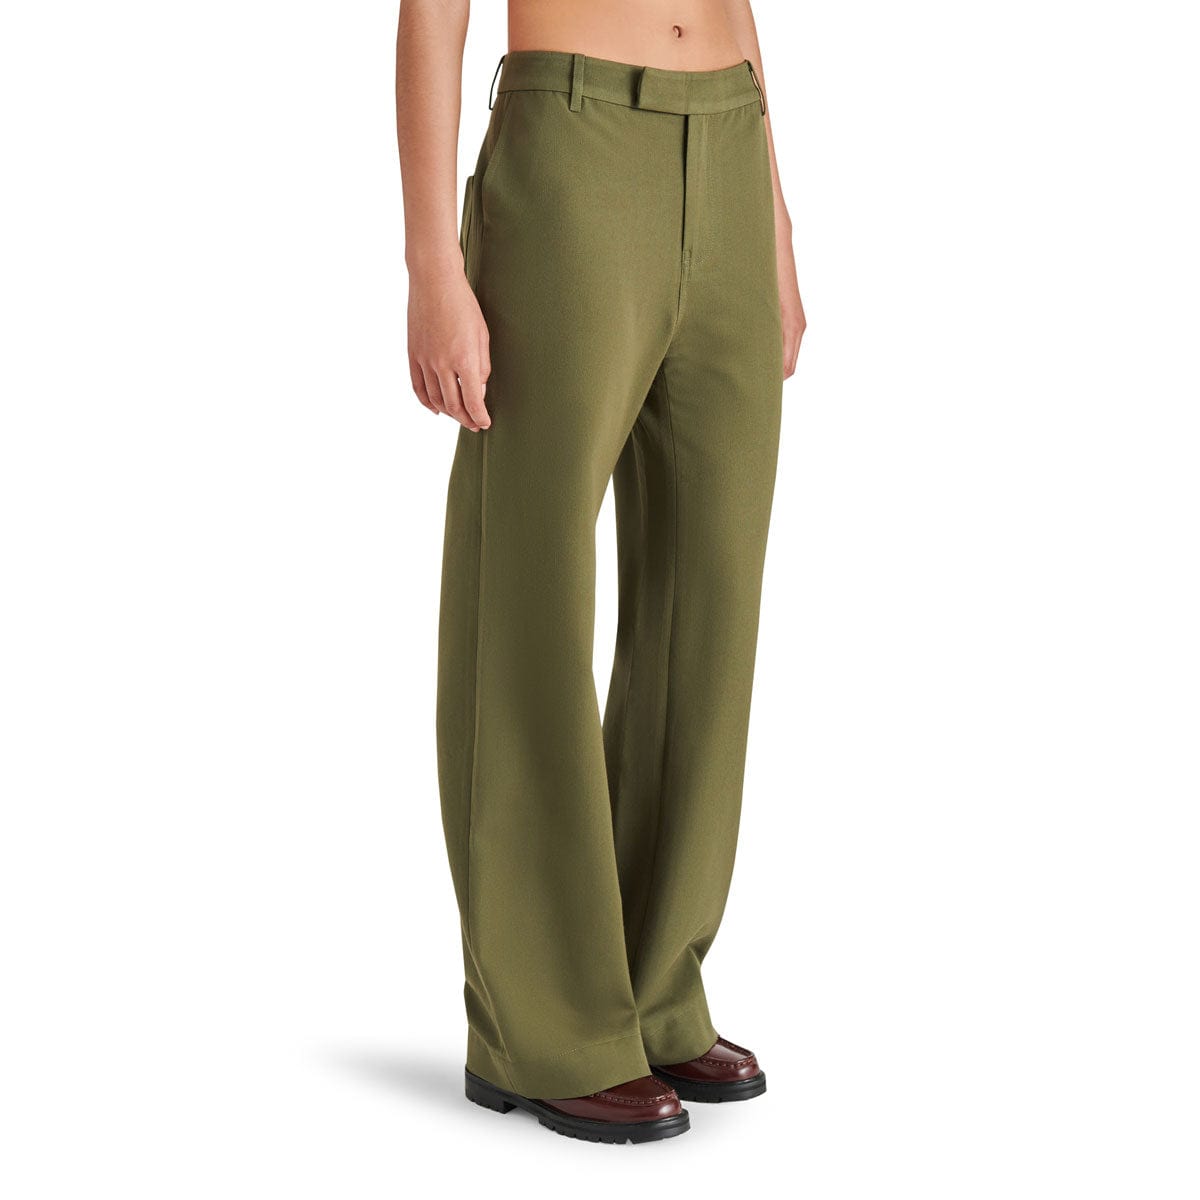 Steve Madden Devin Bootcut Pants olive side | MILK MONEY milkmoney.co | cute clothes for women. womens online clothing. trendy online clothing stores. womens casual clothing online. trendy clothes online. trendy women's clothing online. ladies online clothing stores. trendy women's clothing stores. cute female clothes.